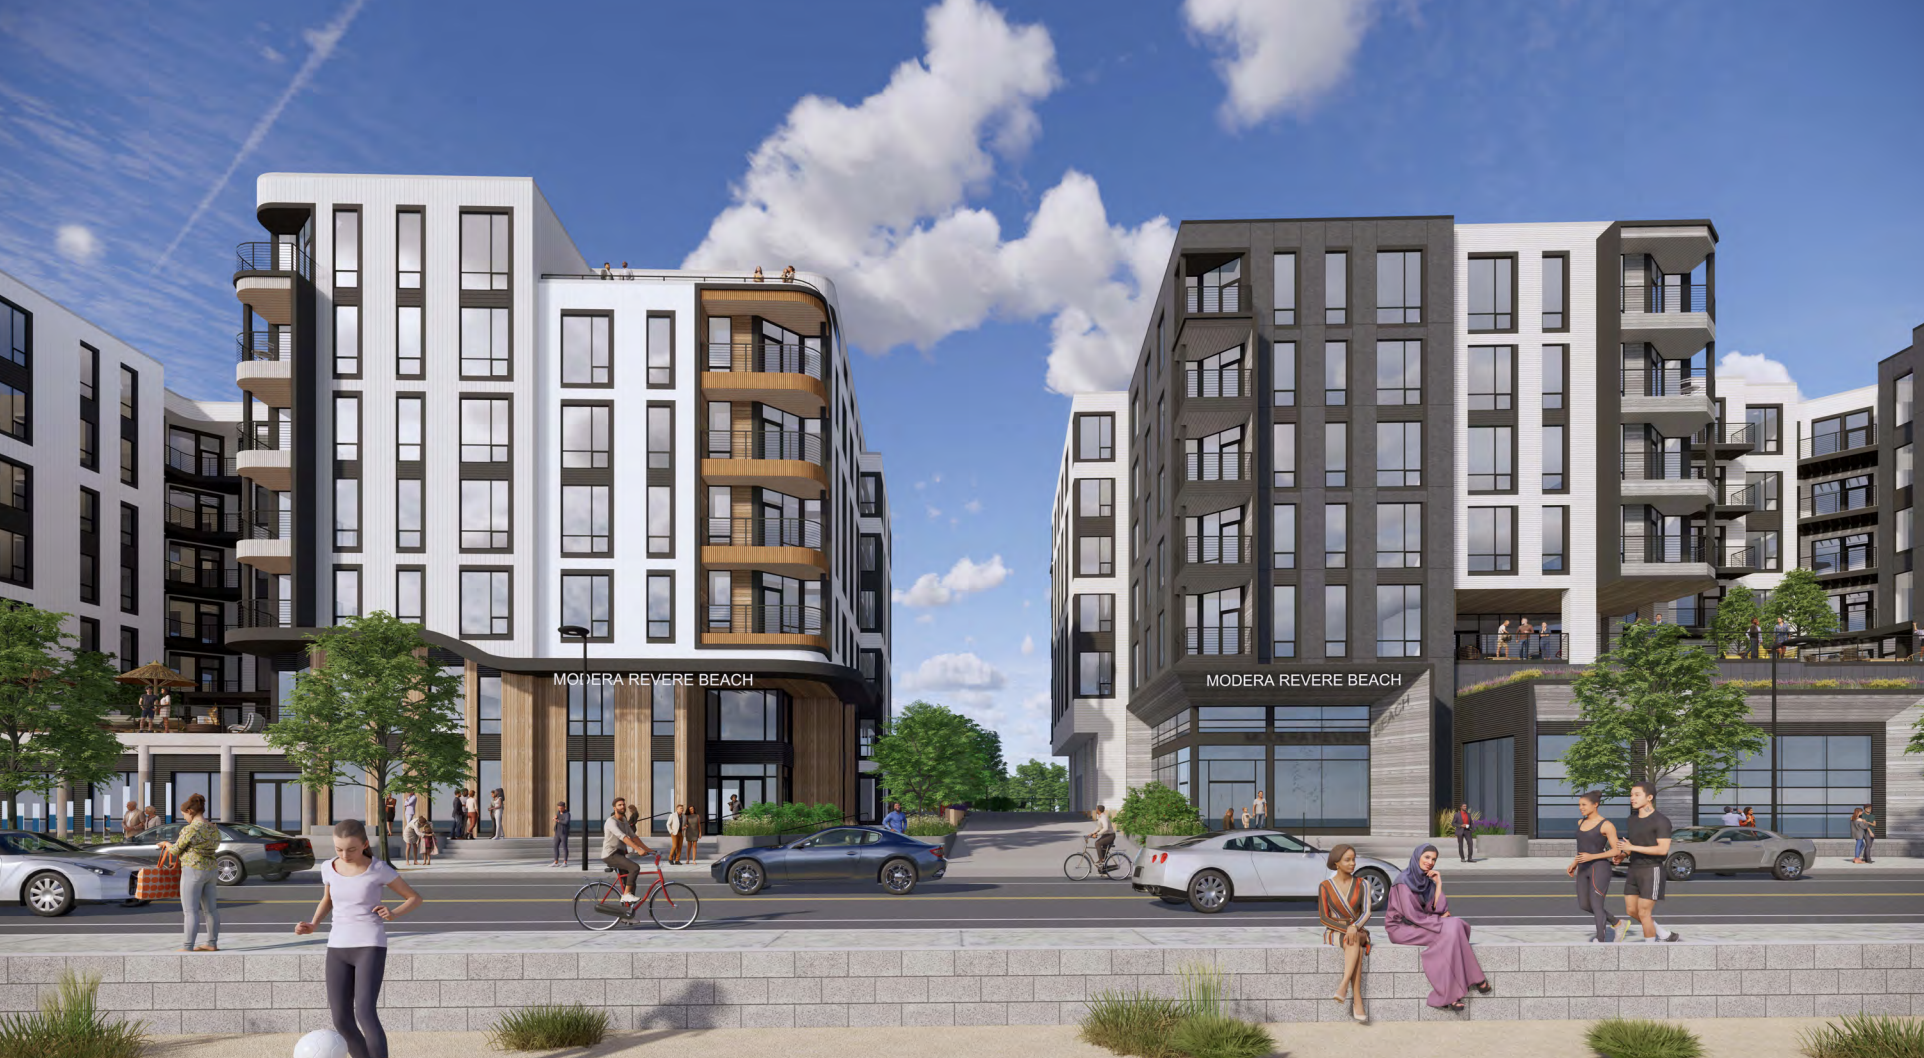 Mill Creek to Add 357 Apartments to Nation's Oldest Public Beach in Massachusetts with Construction Start of Modera Revere Beach